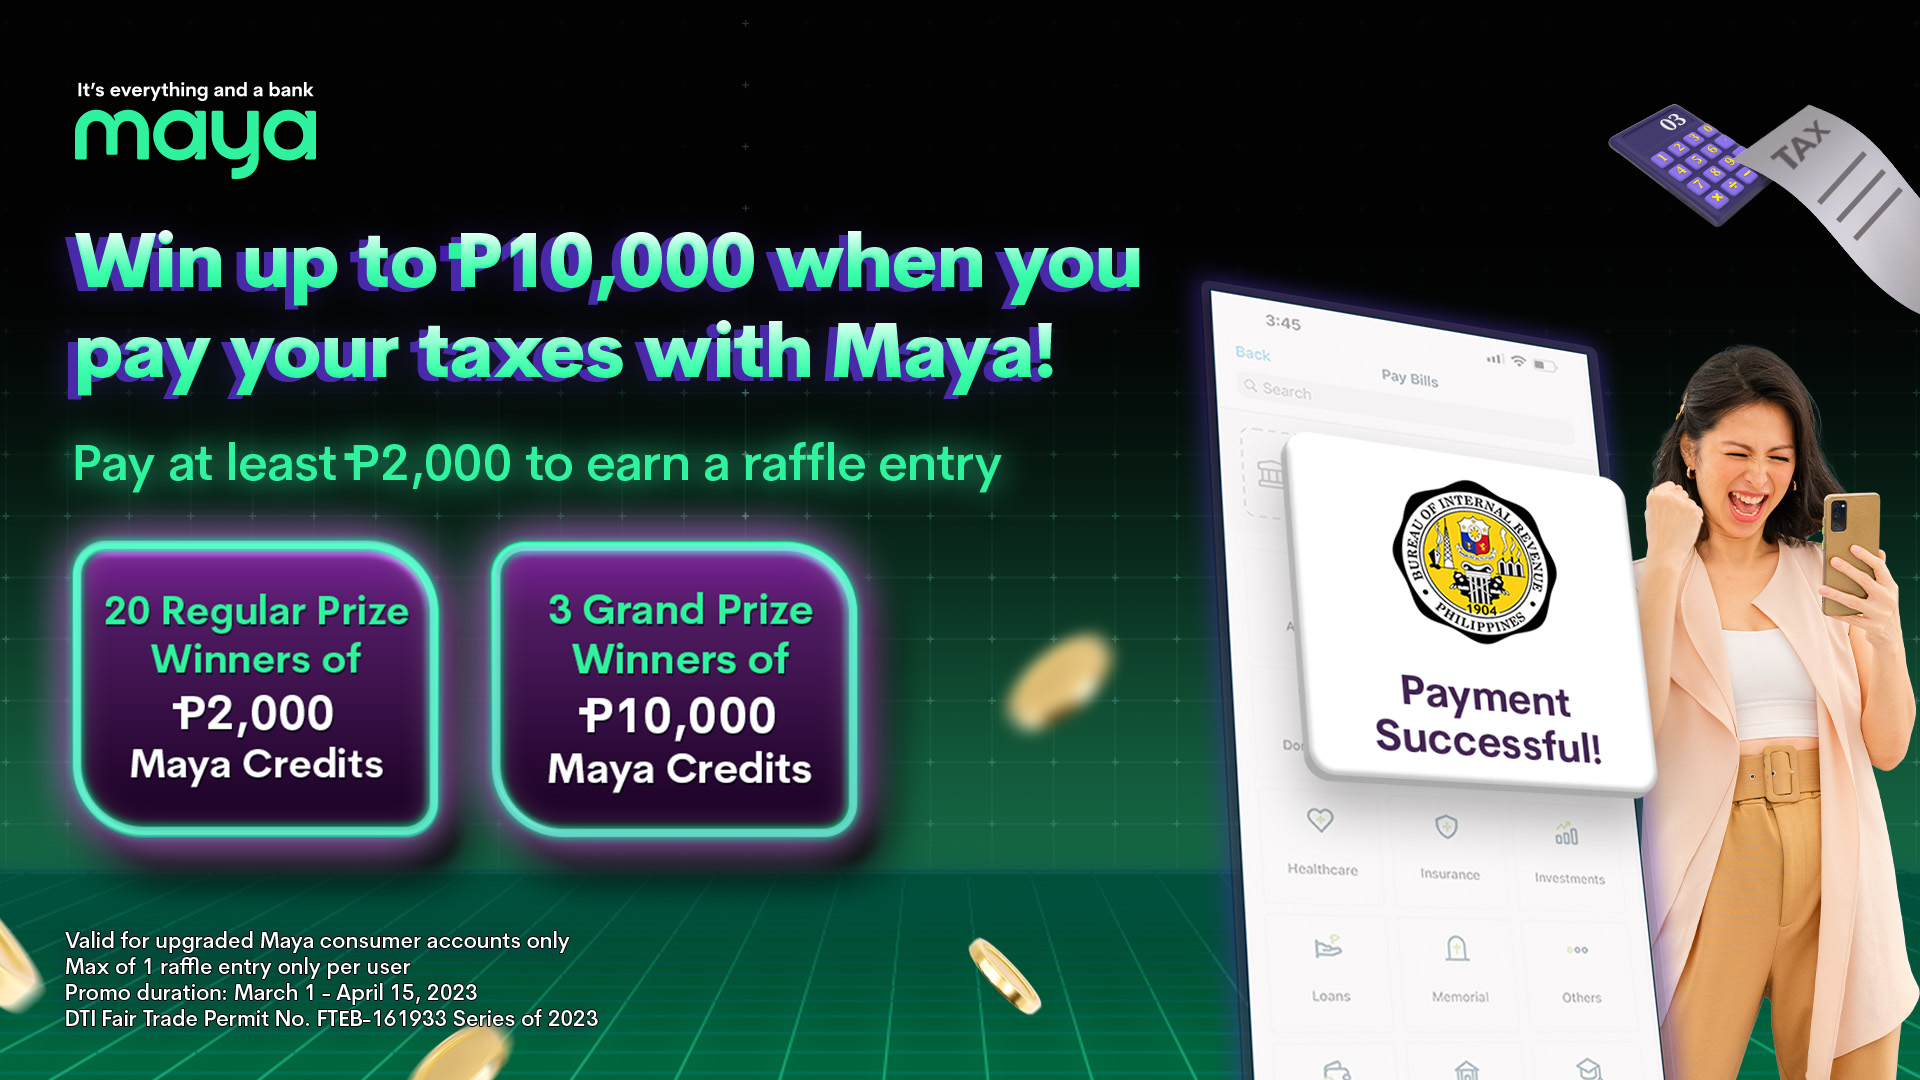 Pay your taxes and win up to P10,000!